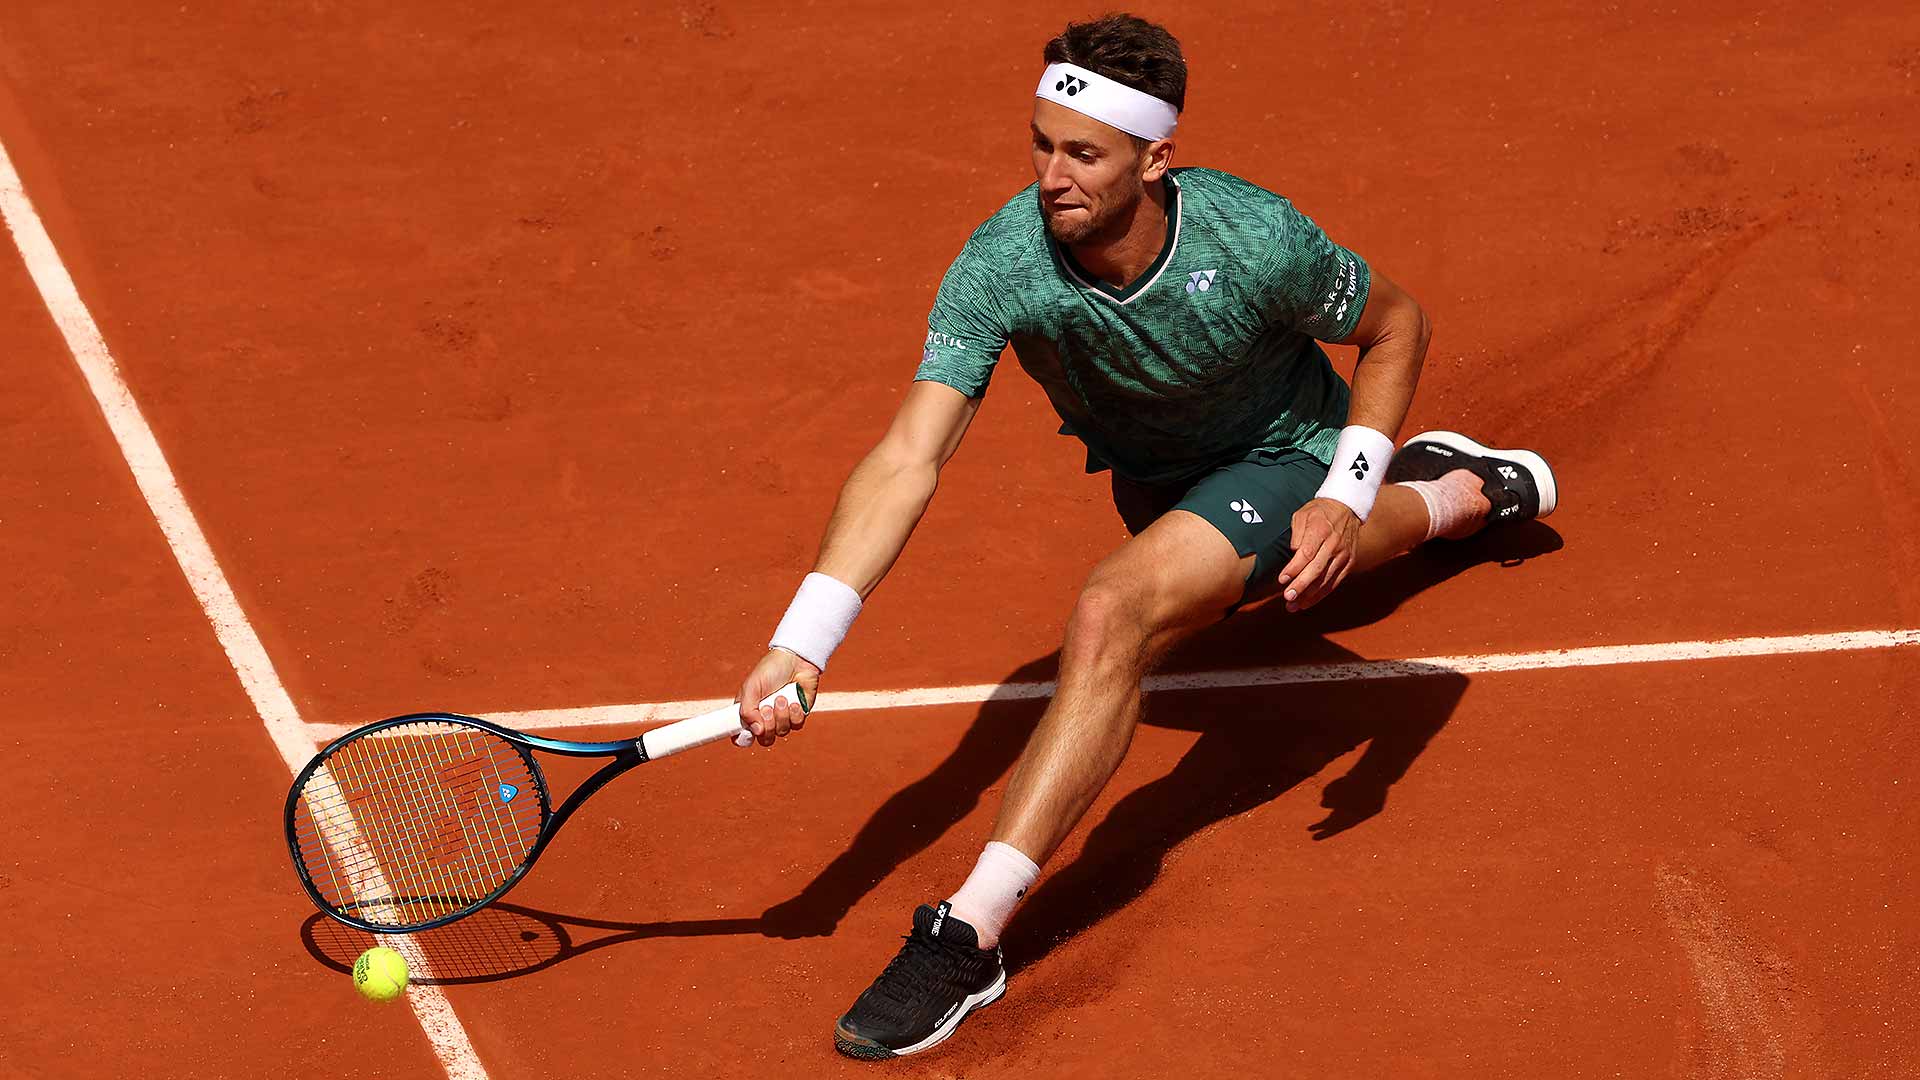 French Open 2022 Live: Casper Ruud becomes first Norwegian to make it to French Open quarterfinals, defeats Hubert Hurkacz in a four-setter in fourth round